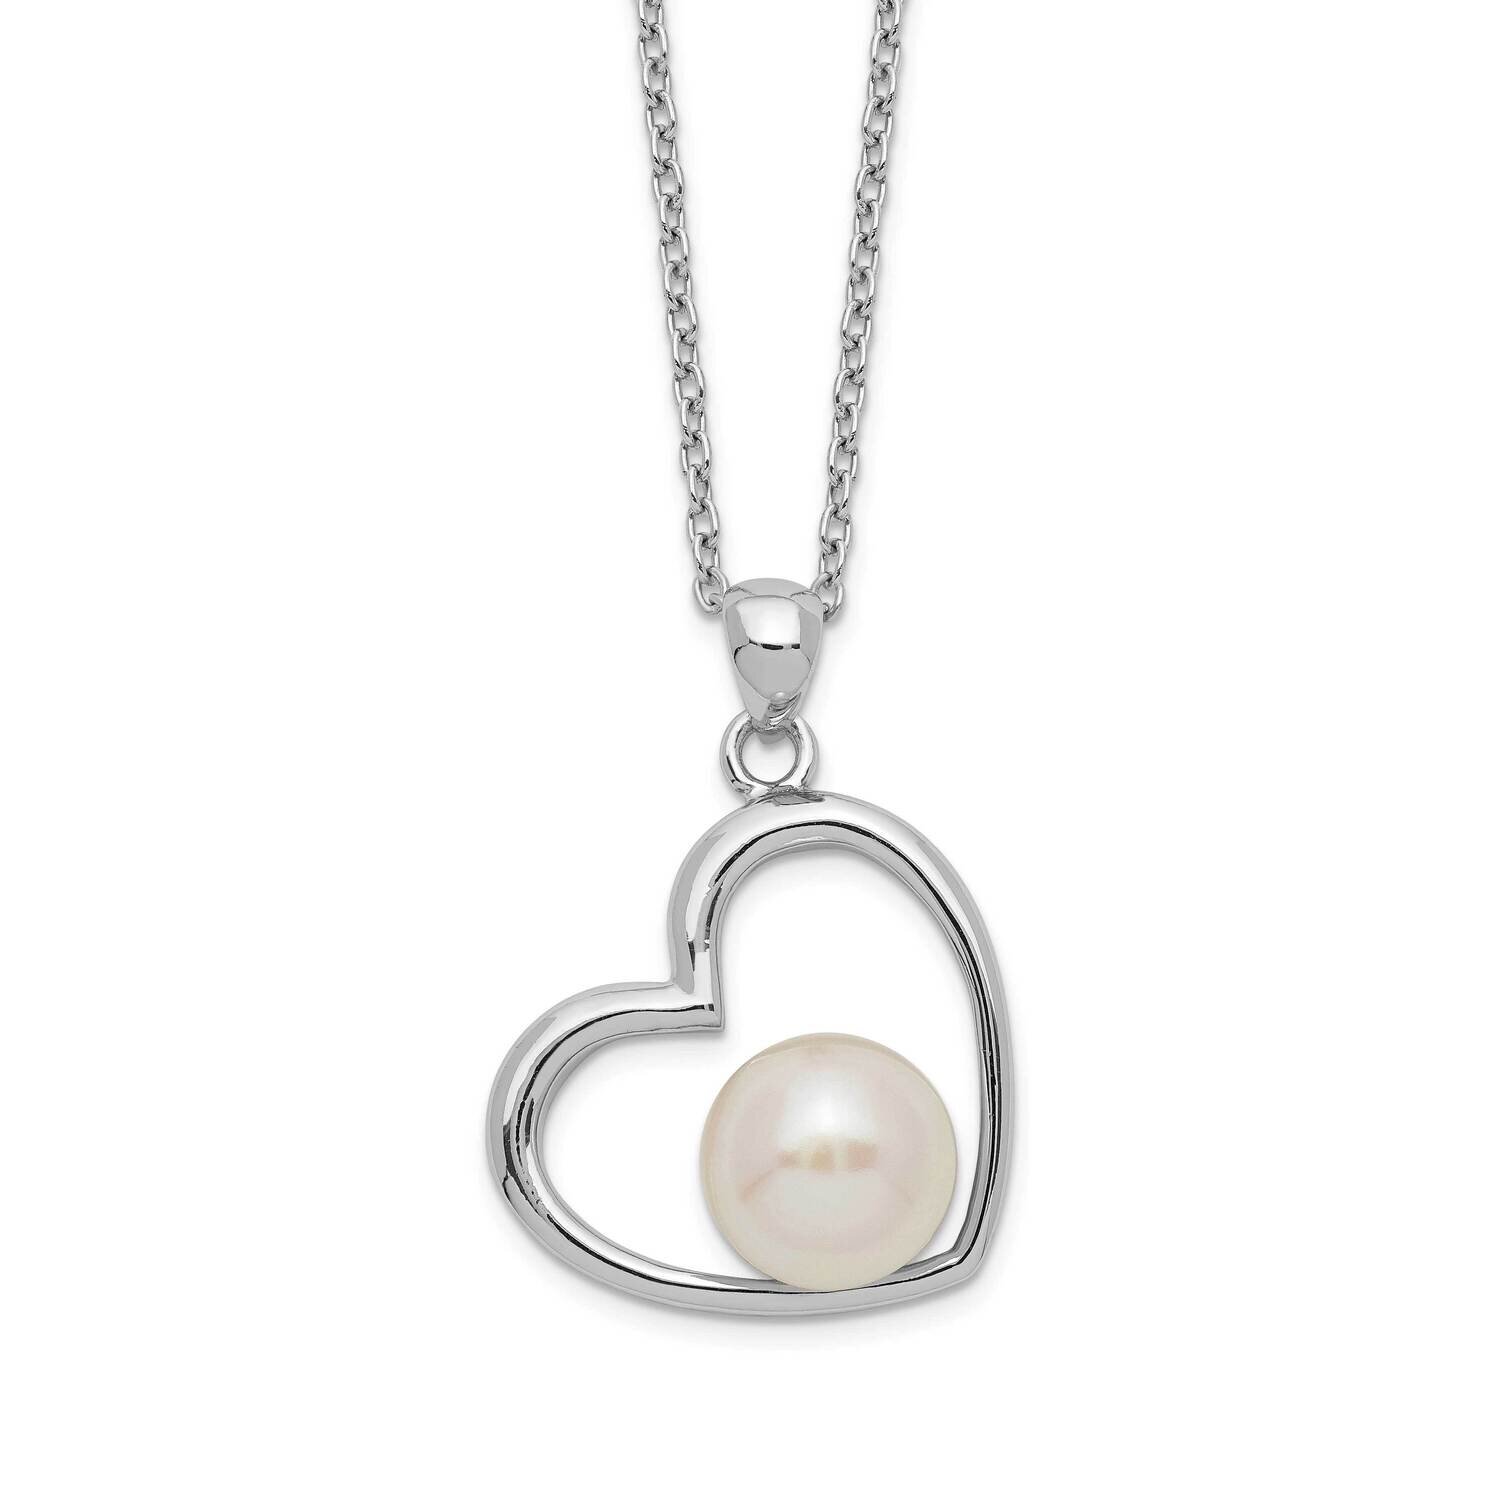 7-8mm White Button Fwc Pearl Heart Necklace Sterling Silver Rhodium-plated QH5513-17